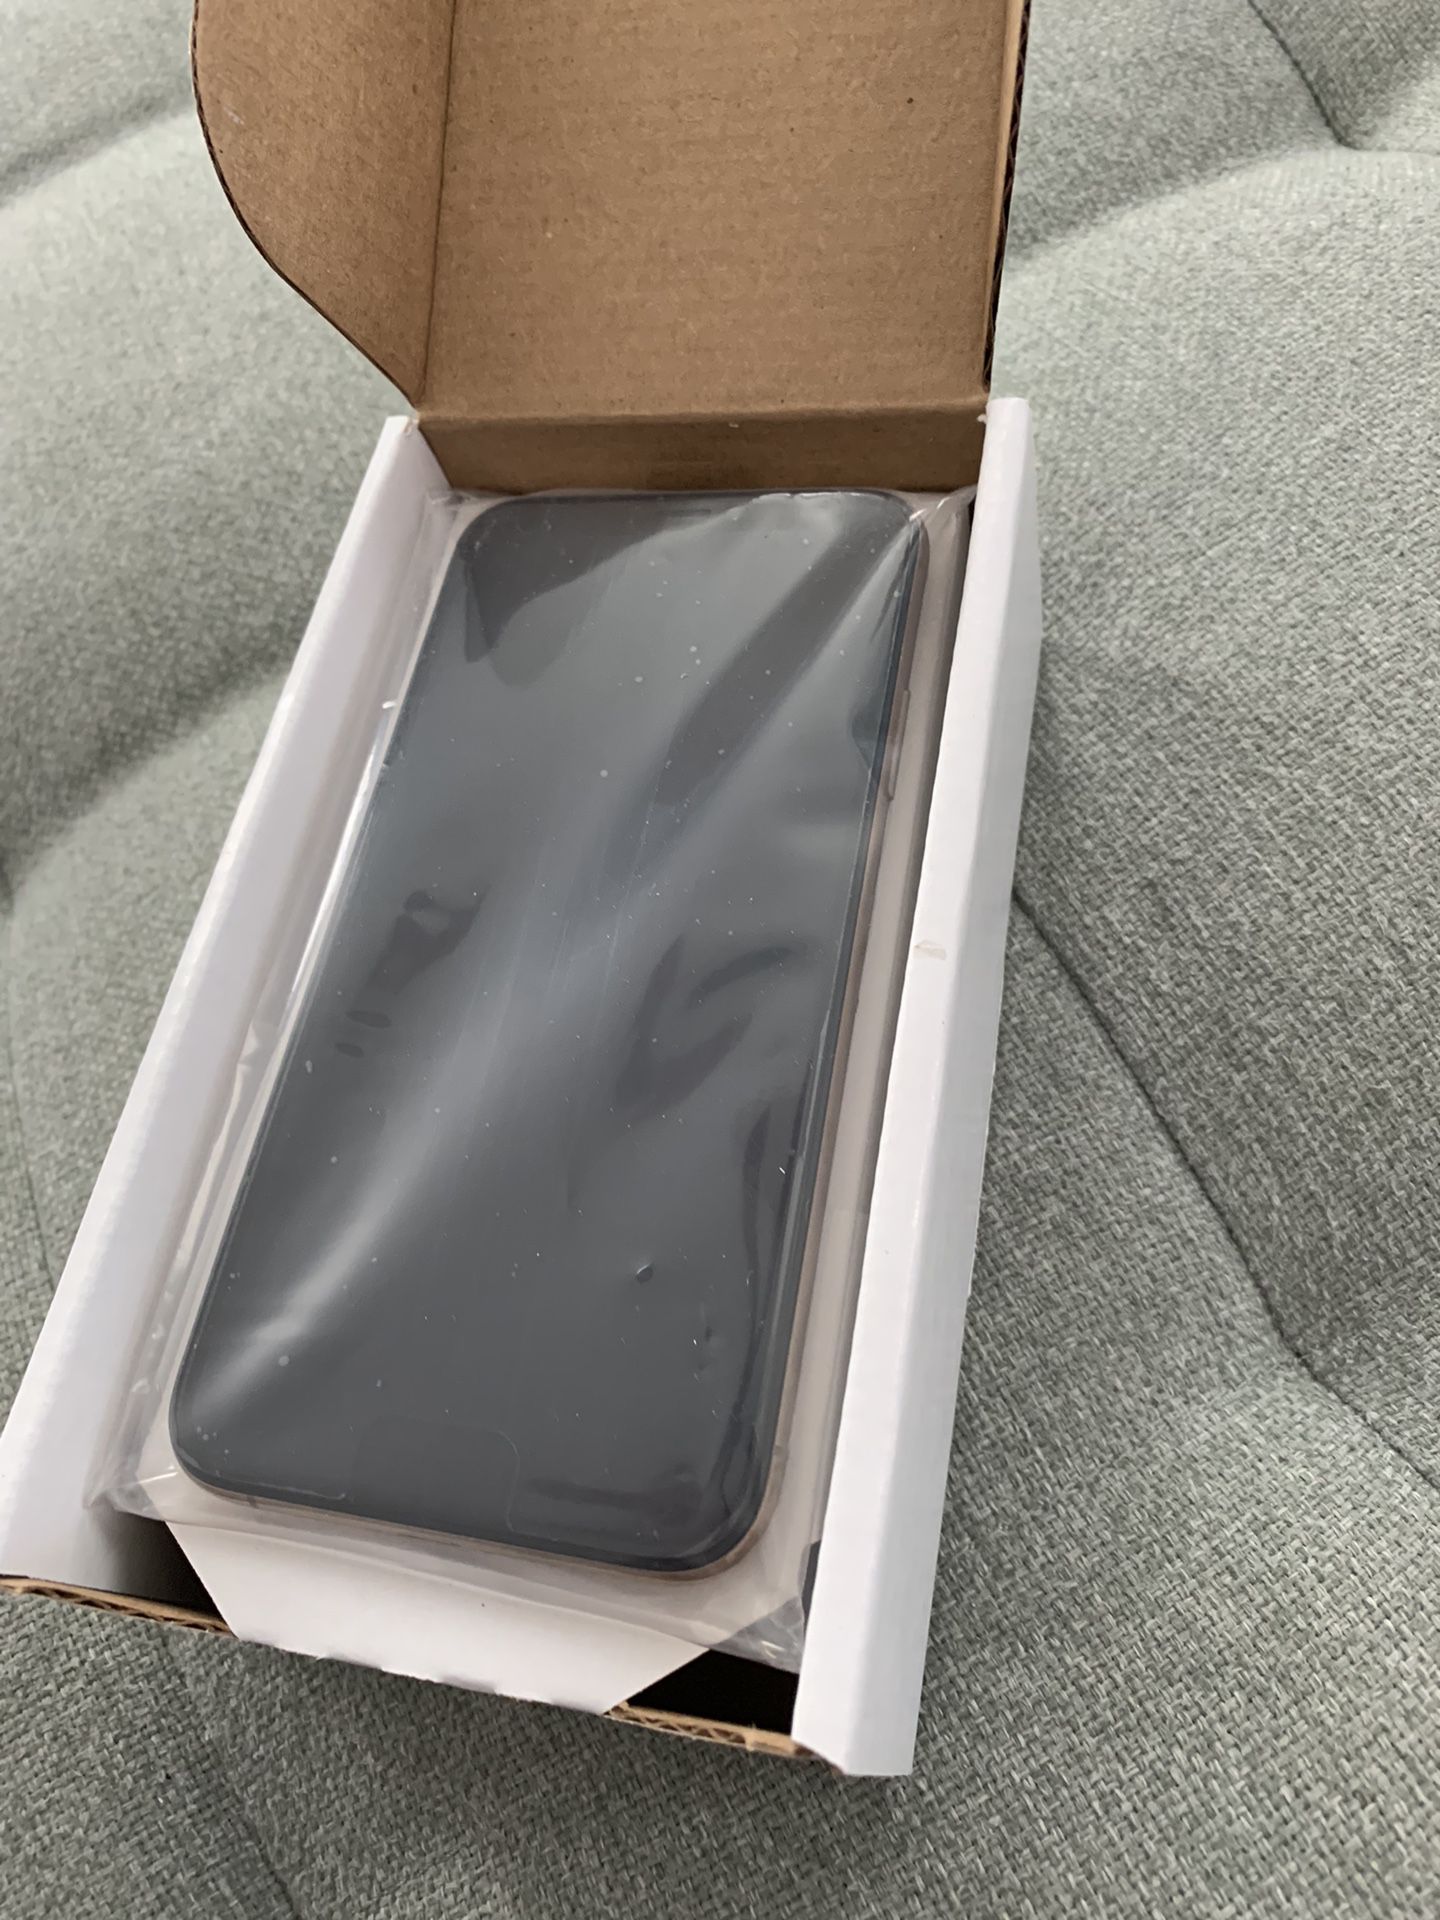 Apple iPhone XS - 512GB - Gold Colors - Factory Unlocked ,New in Box